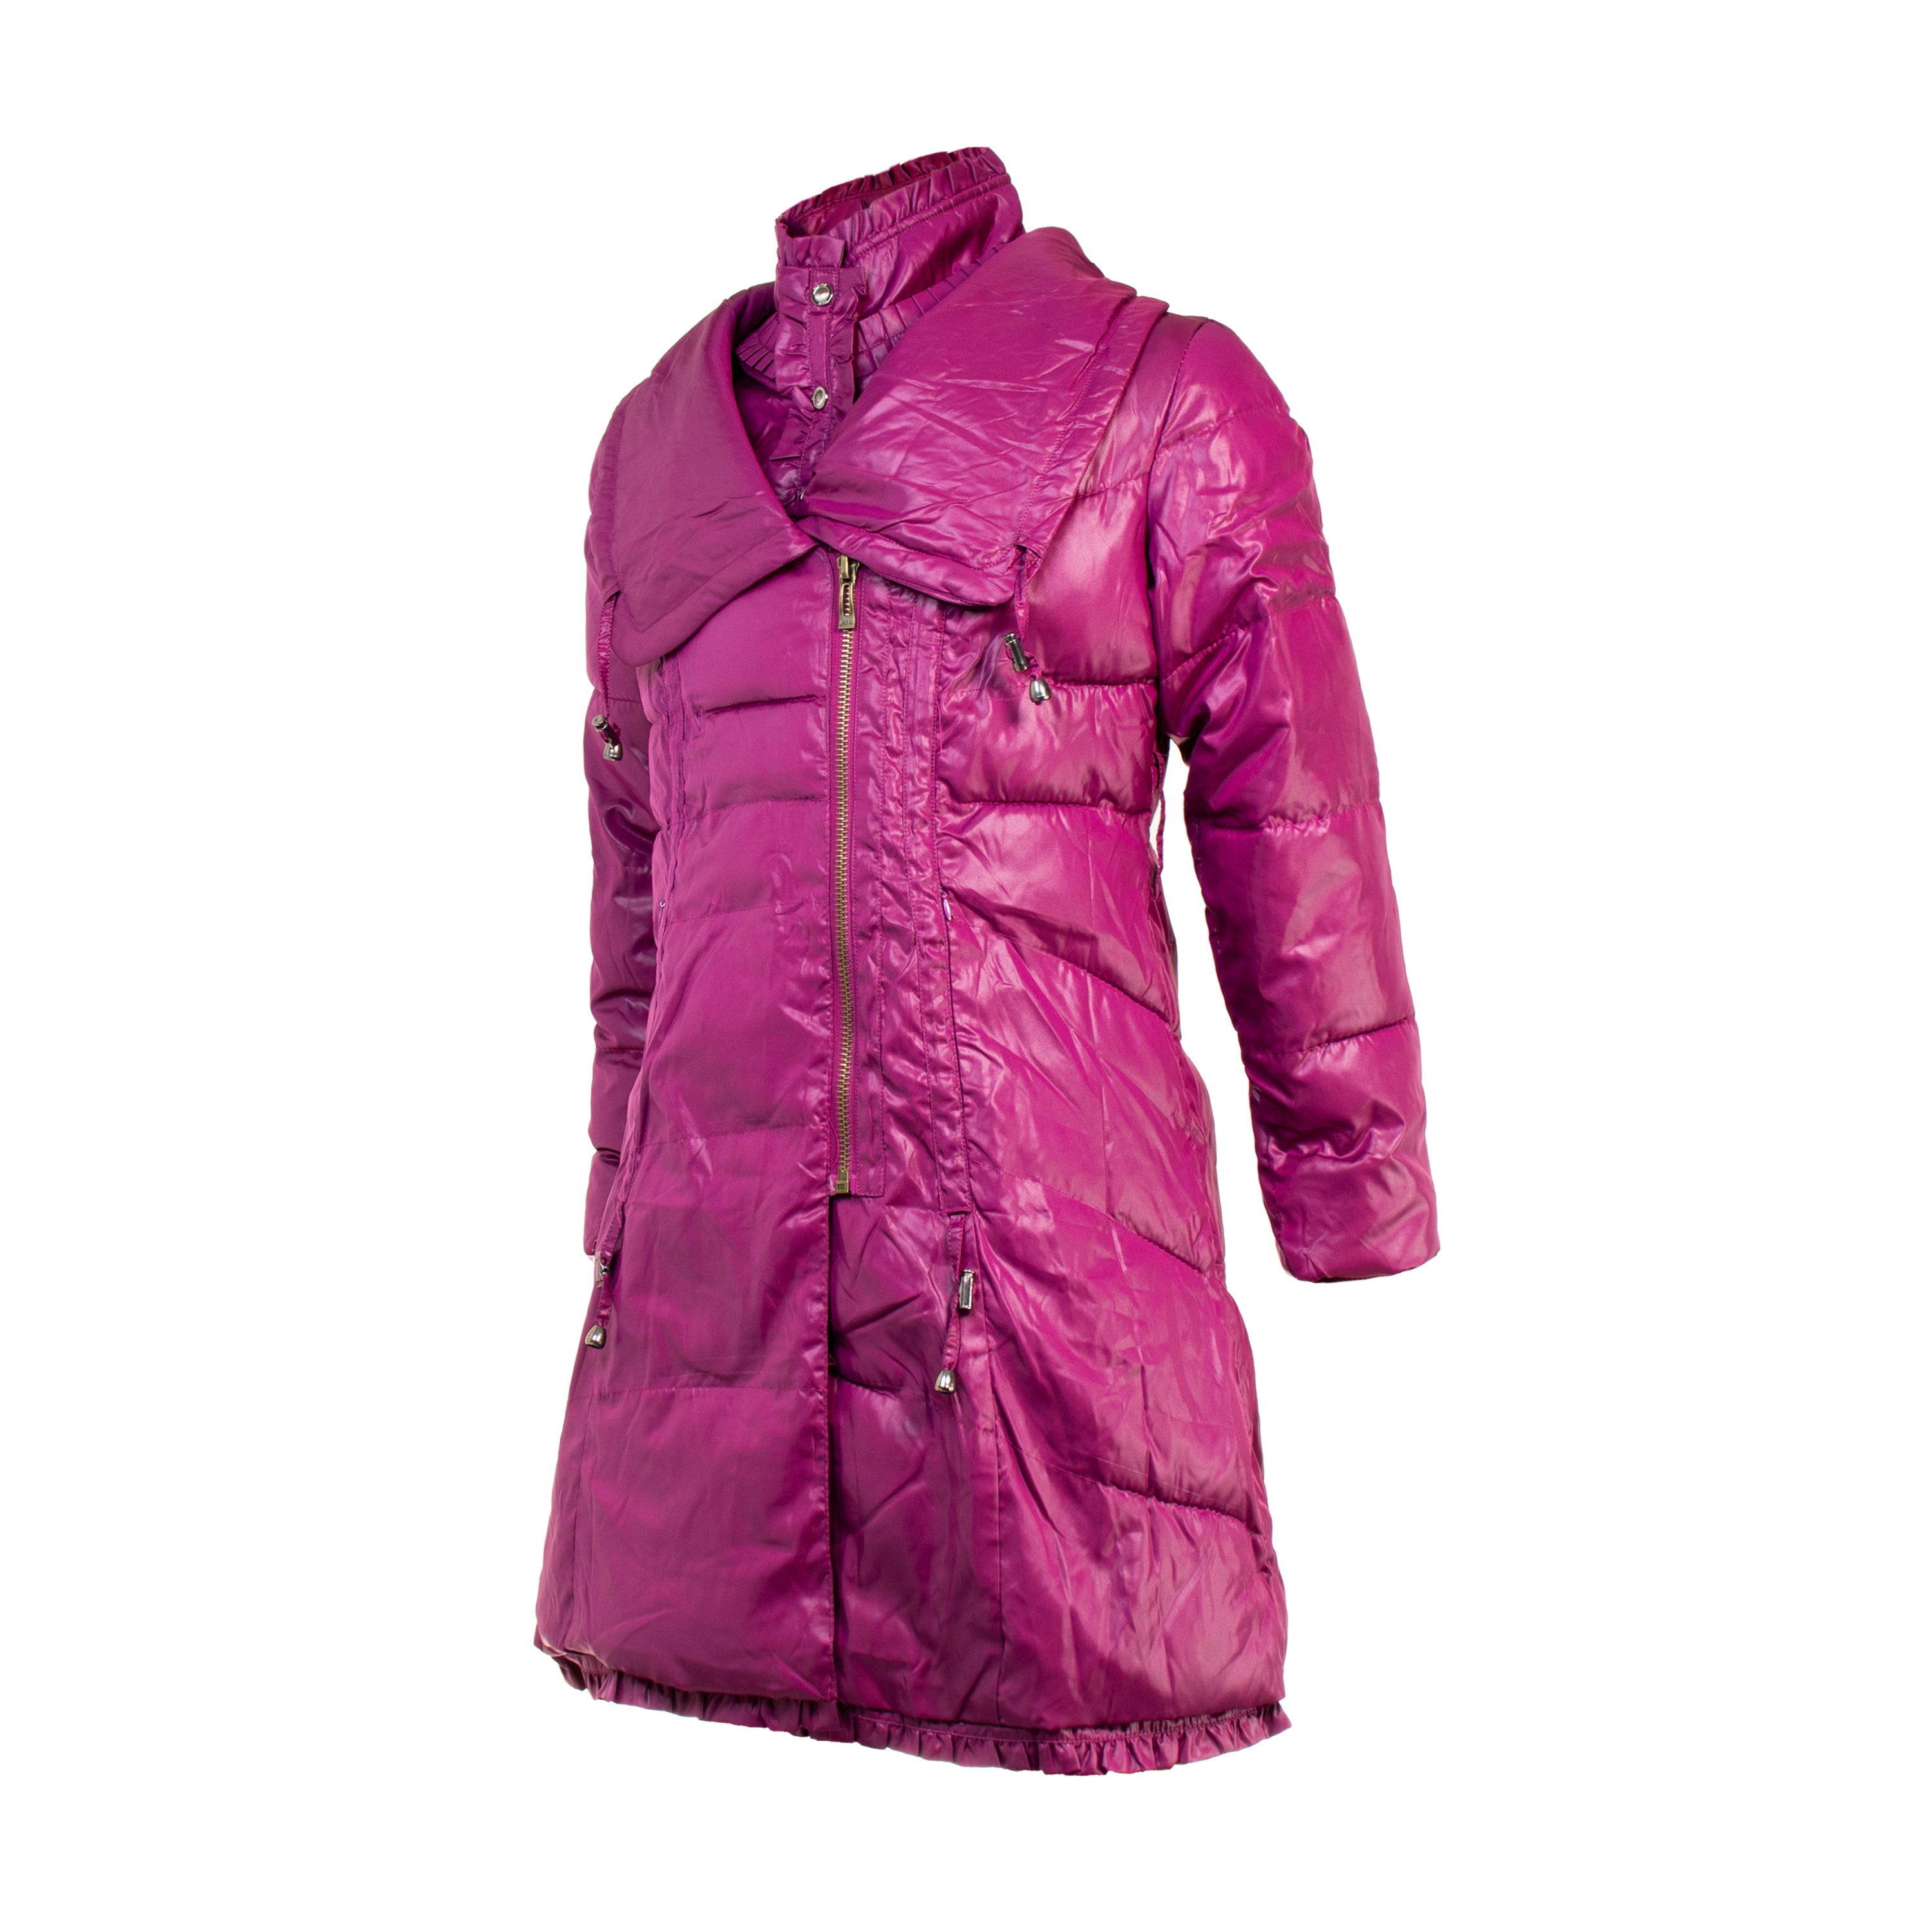 Girls Pink Ladies Jacket - Grease | Party City